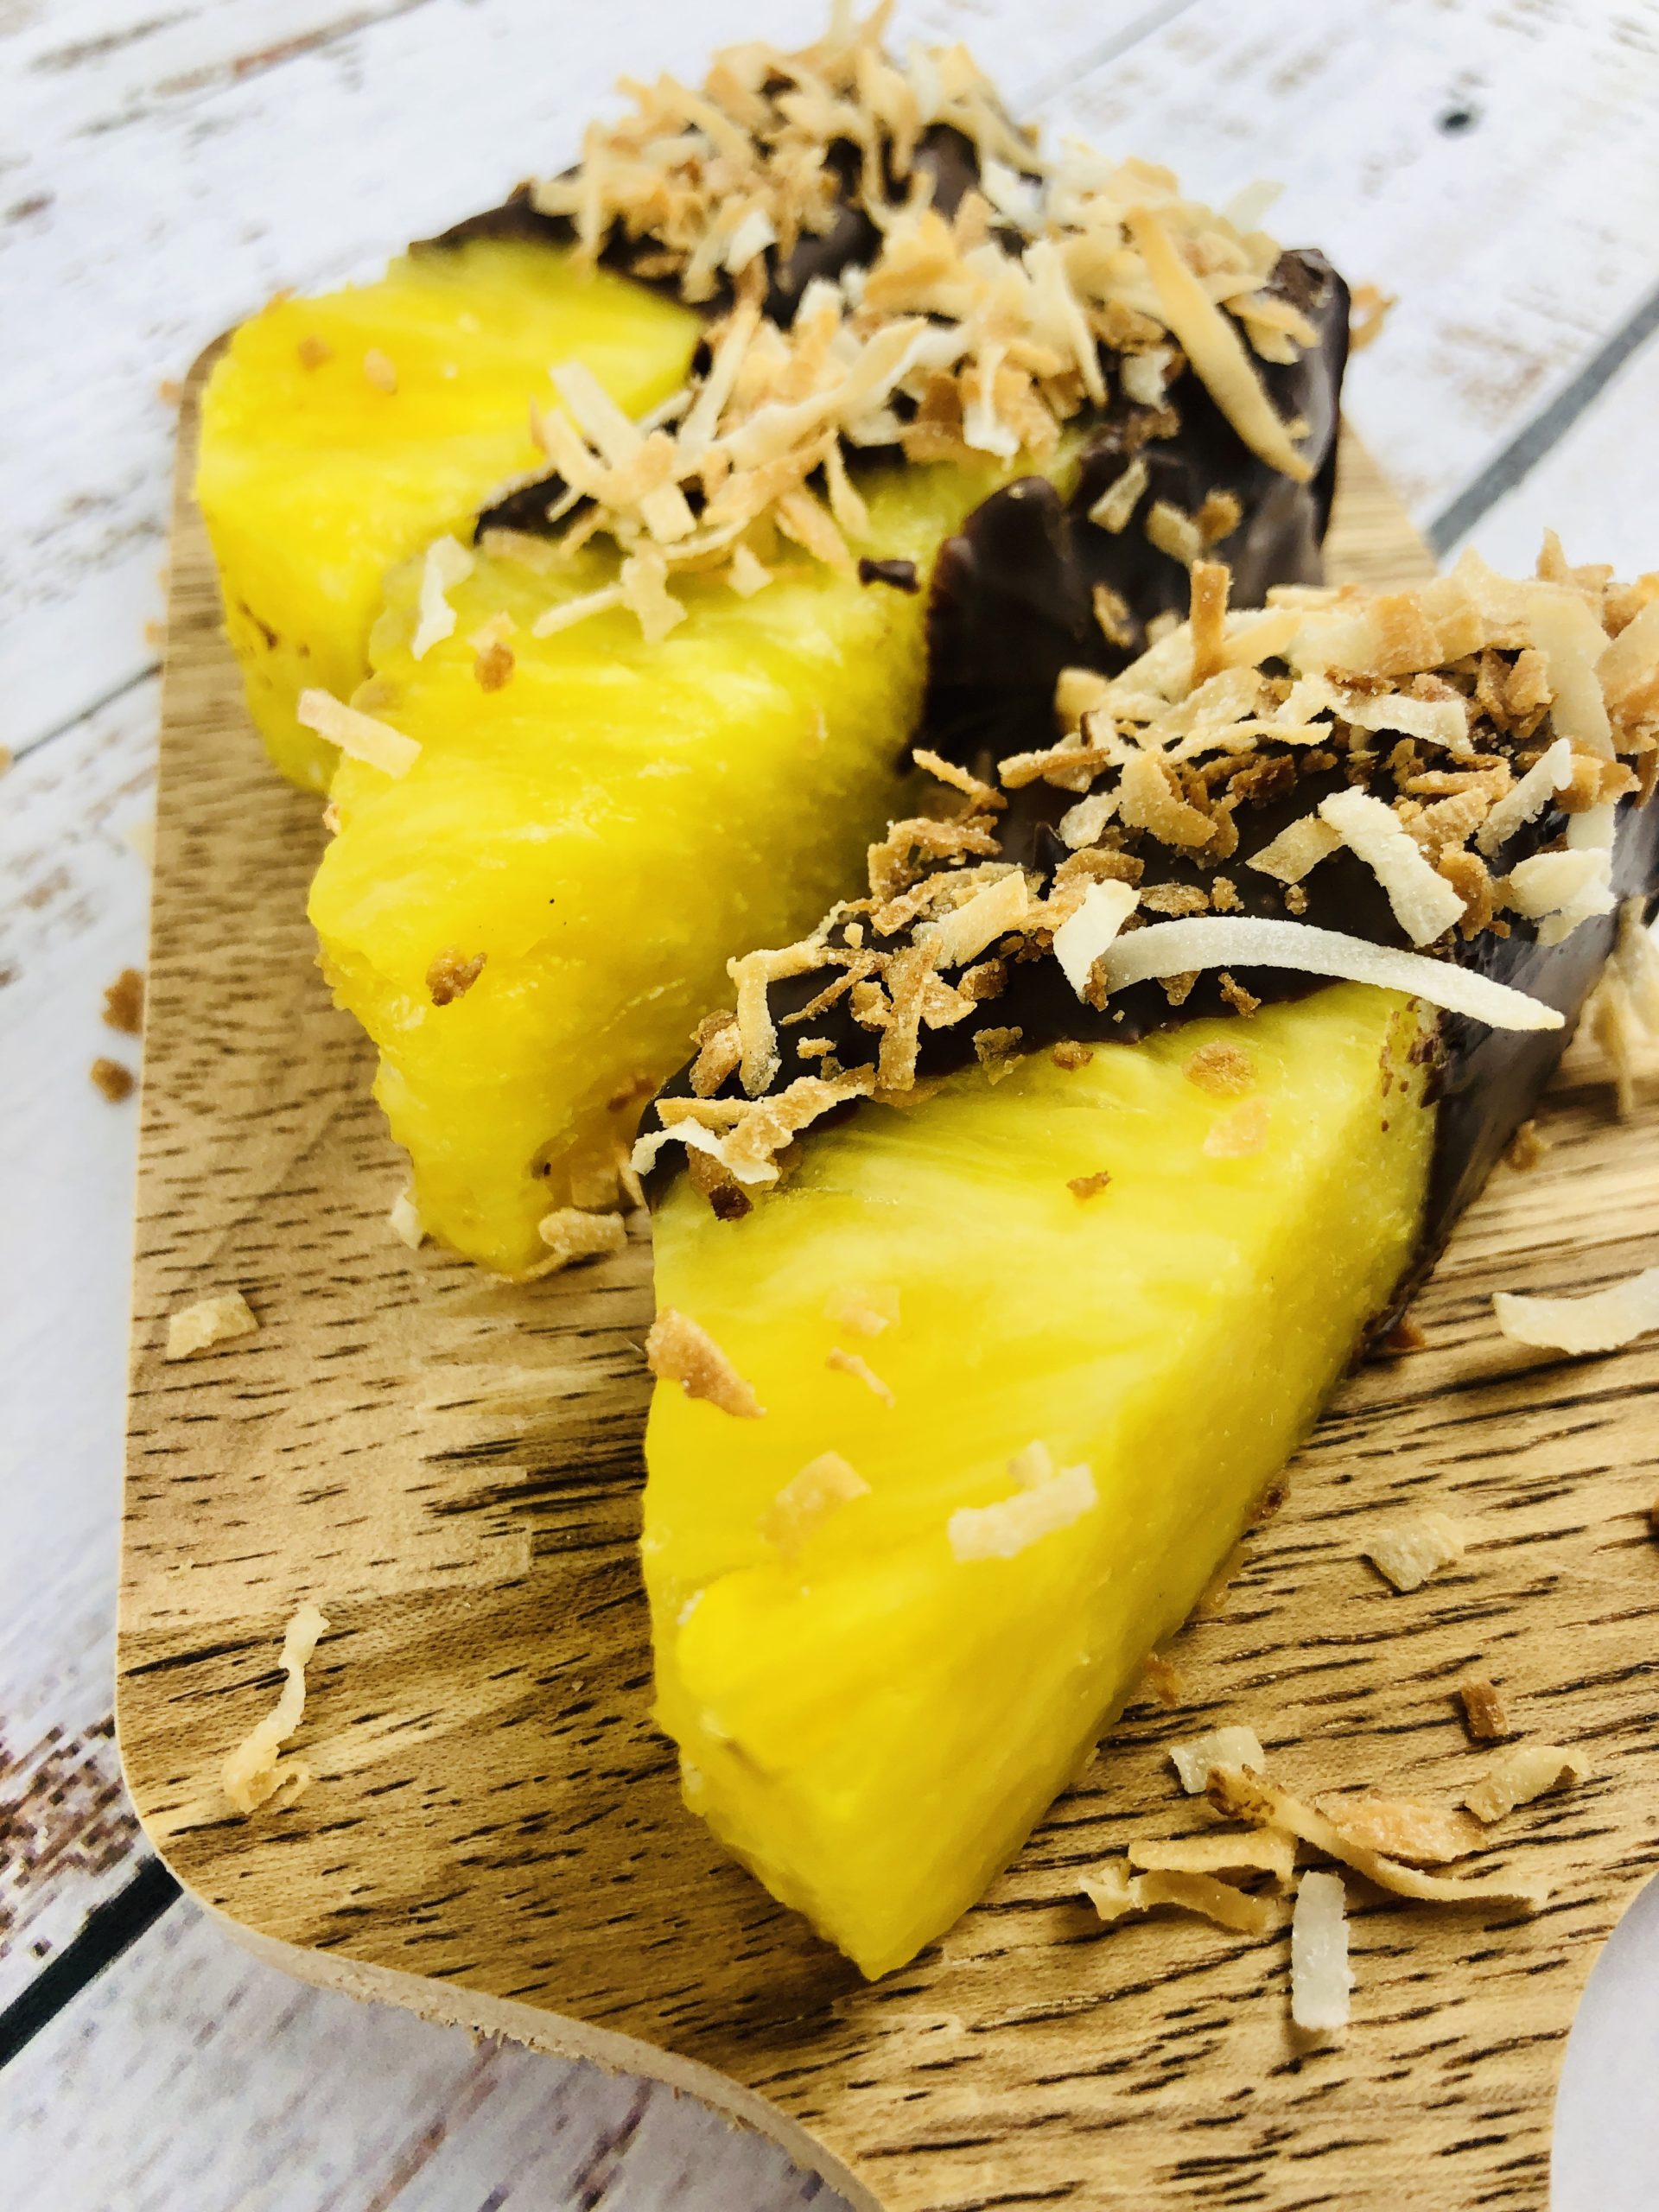 A wooden cutting board with pineapple covered in chocolate and coconut.